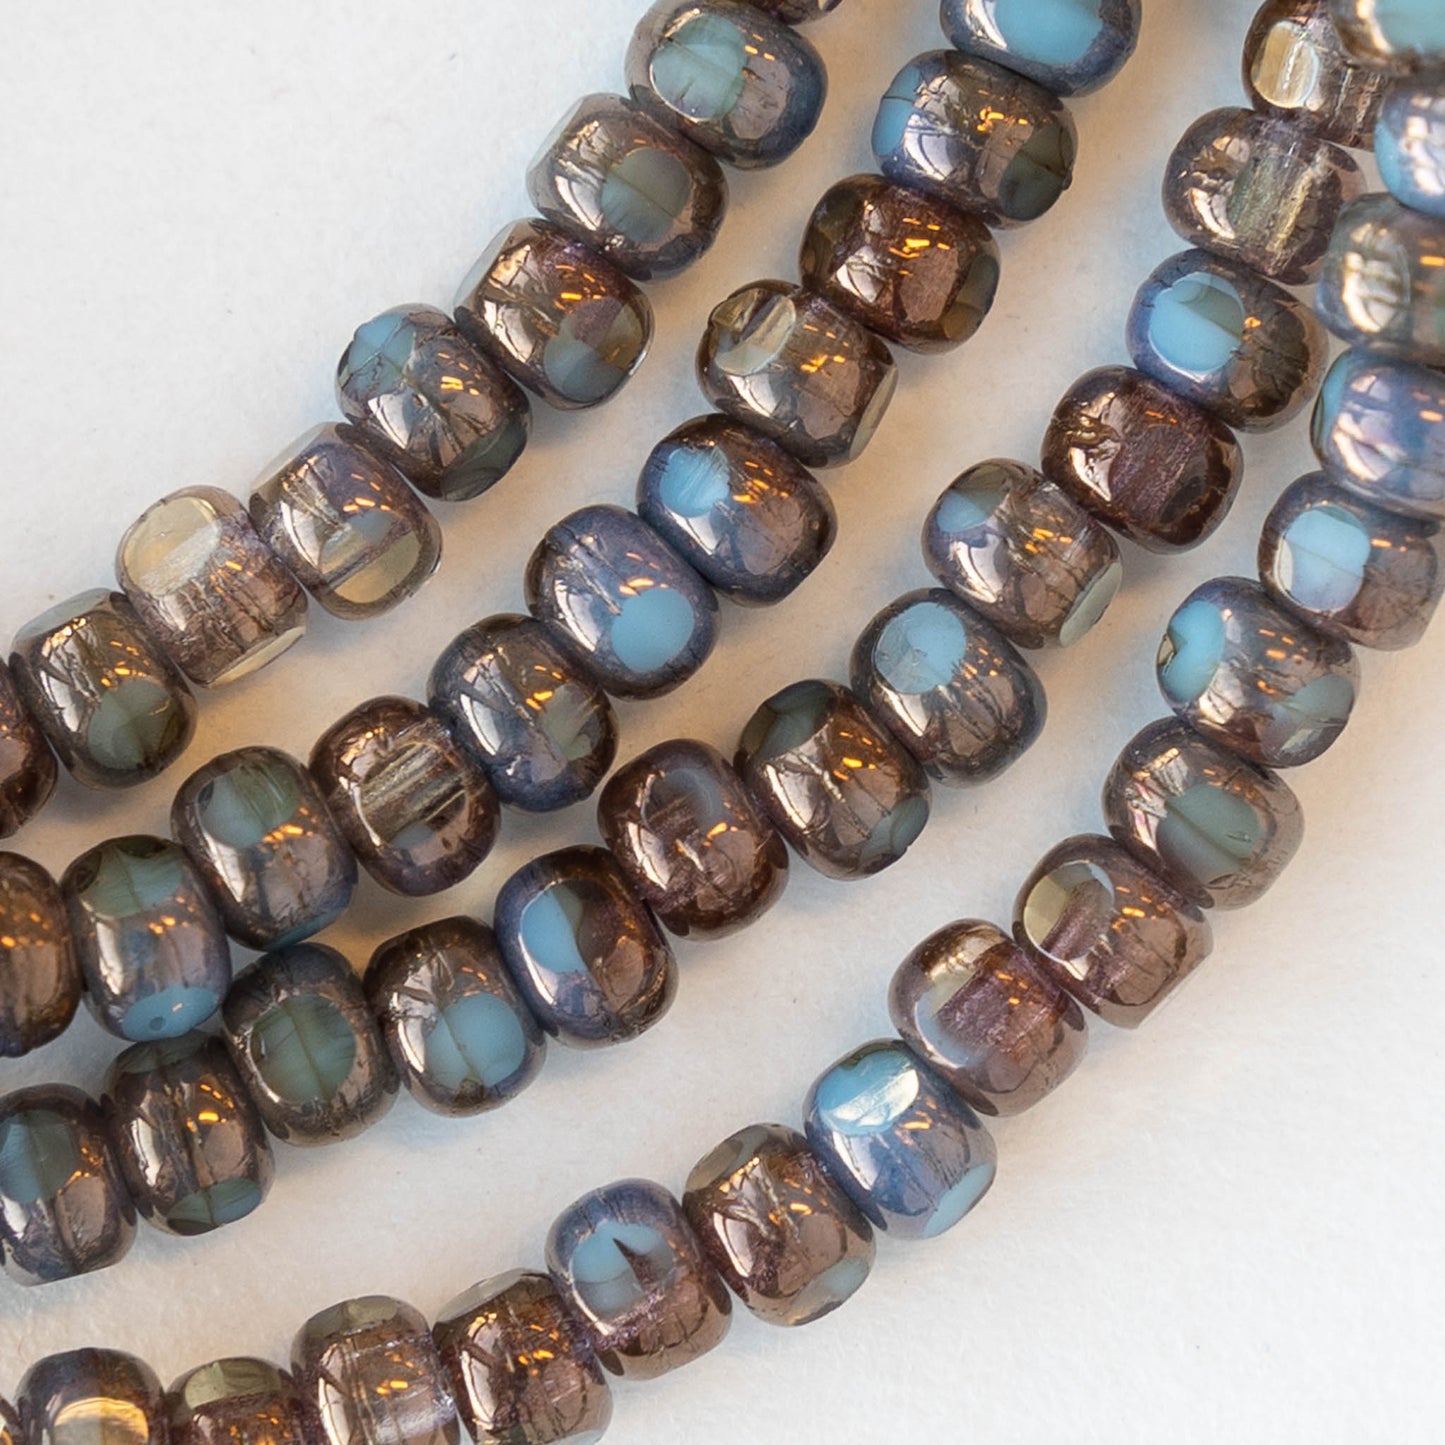 Size 6 Tri-cut Beads - Sky Blue with Bronze Finish - 50 beads